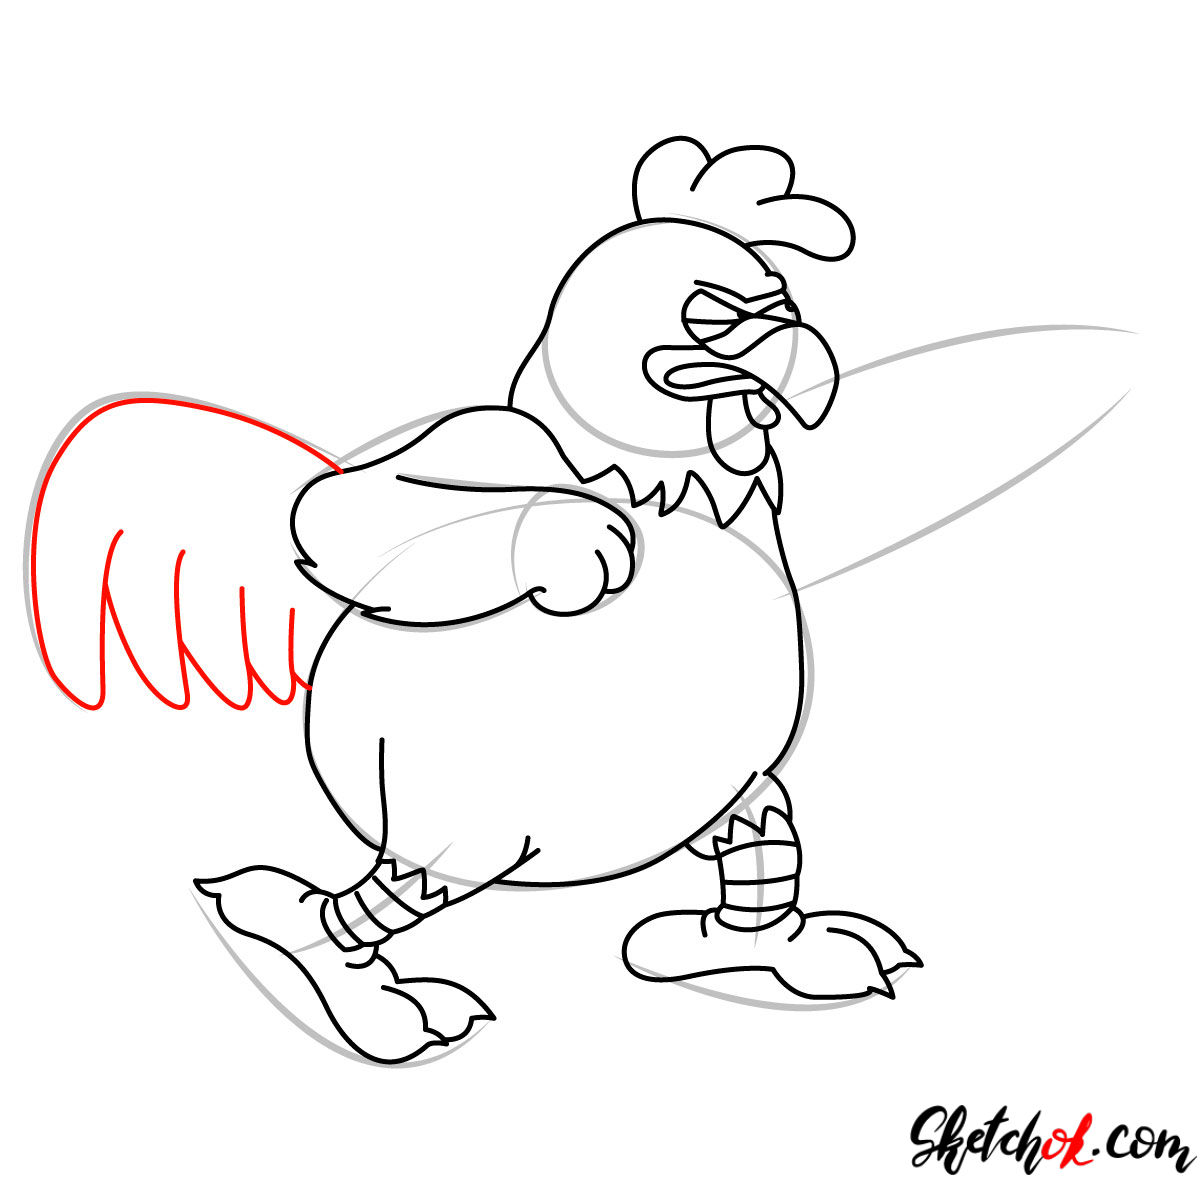 How to draw Ernie the Giant Chicken - step 09